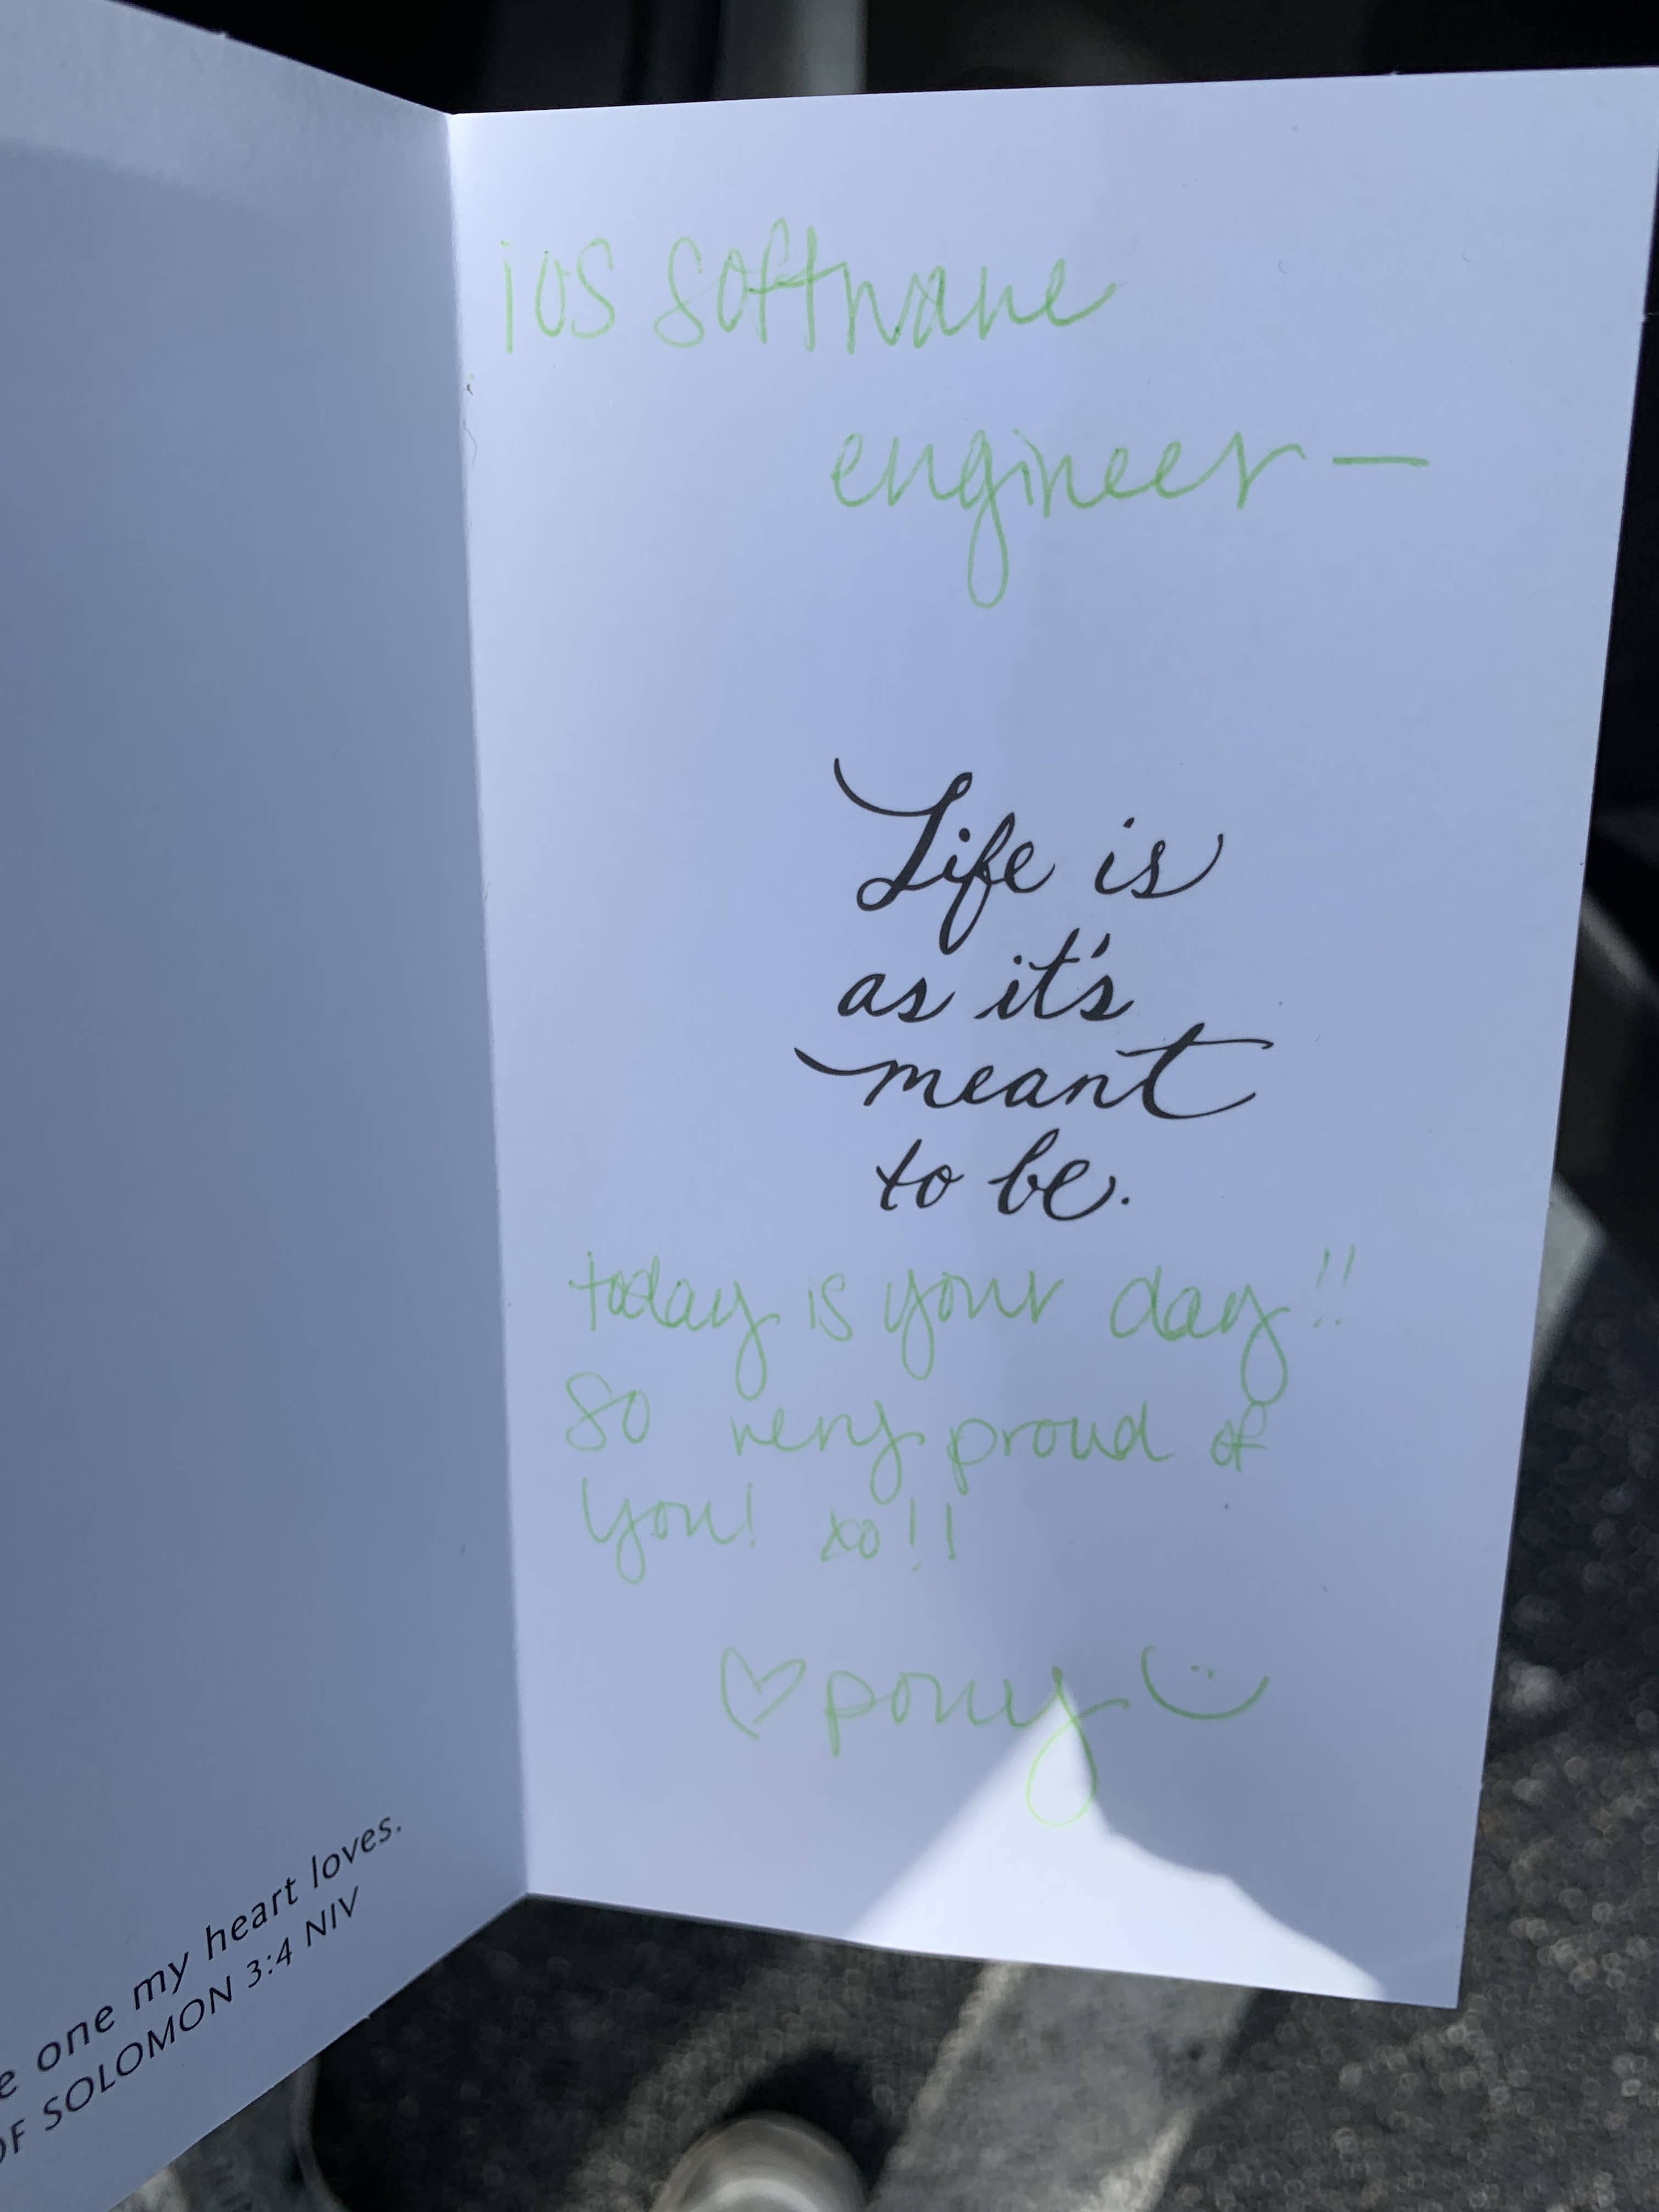 A card congratulating Jordan on the launch of Spend Stack.